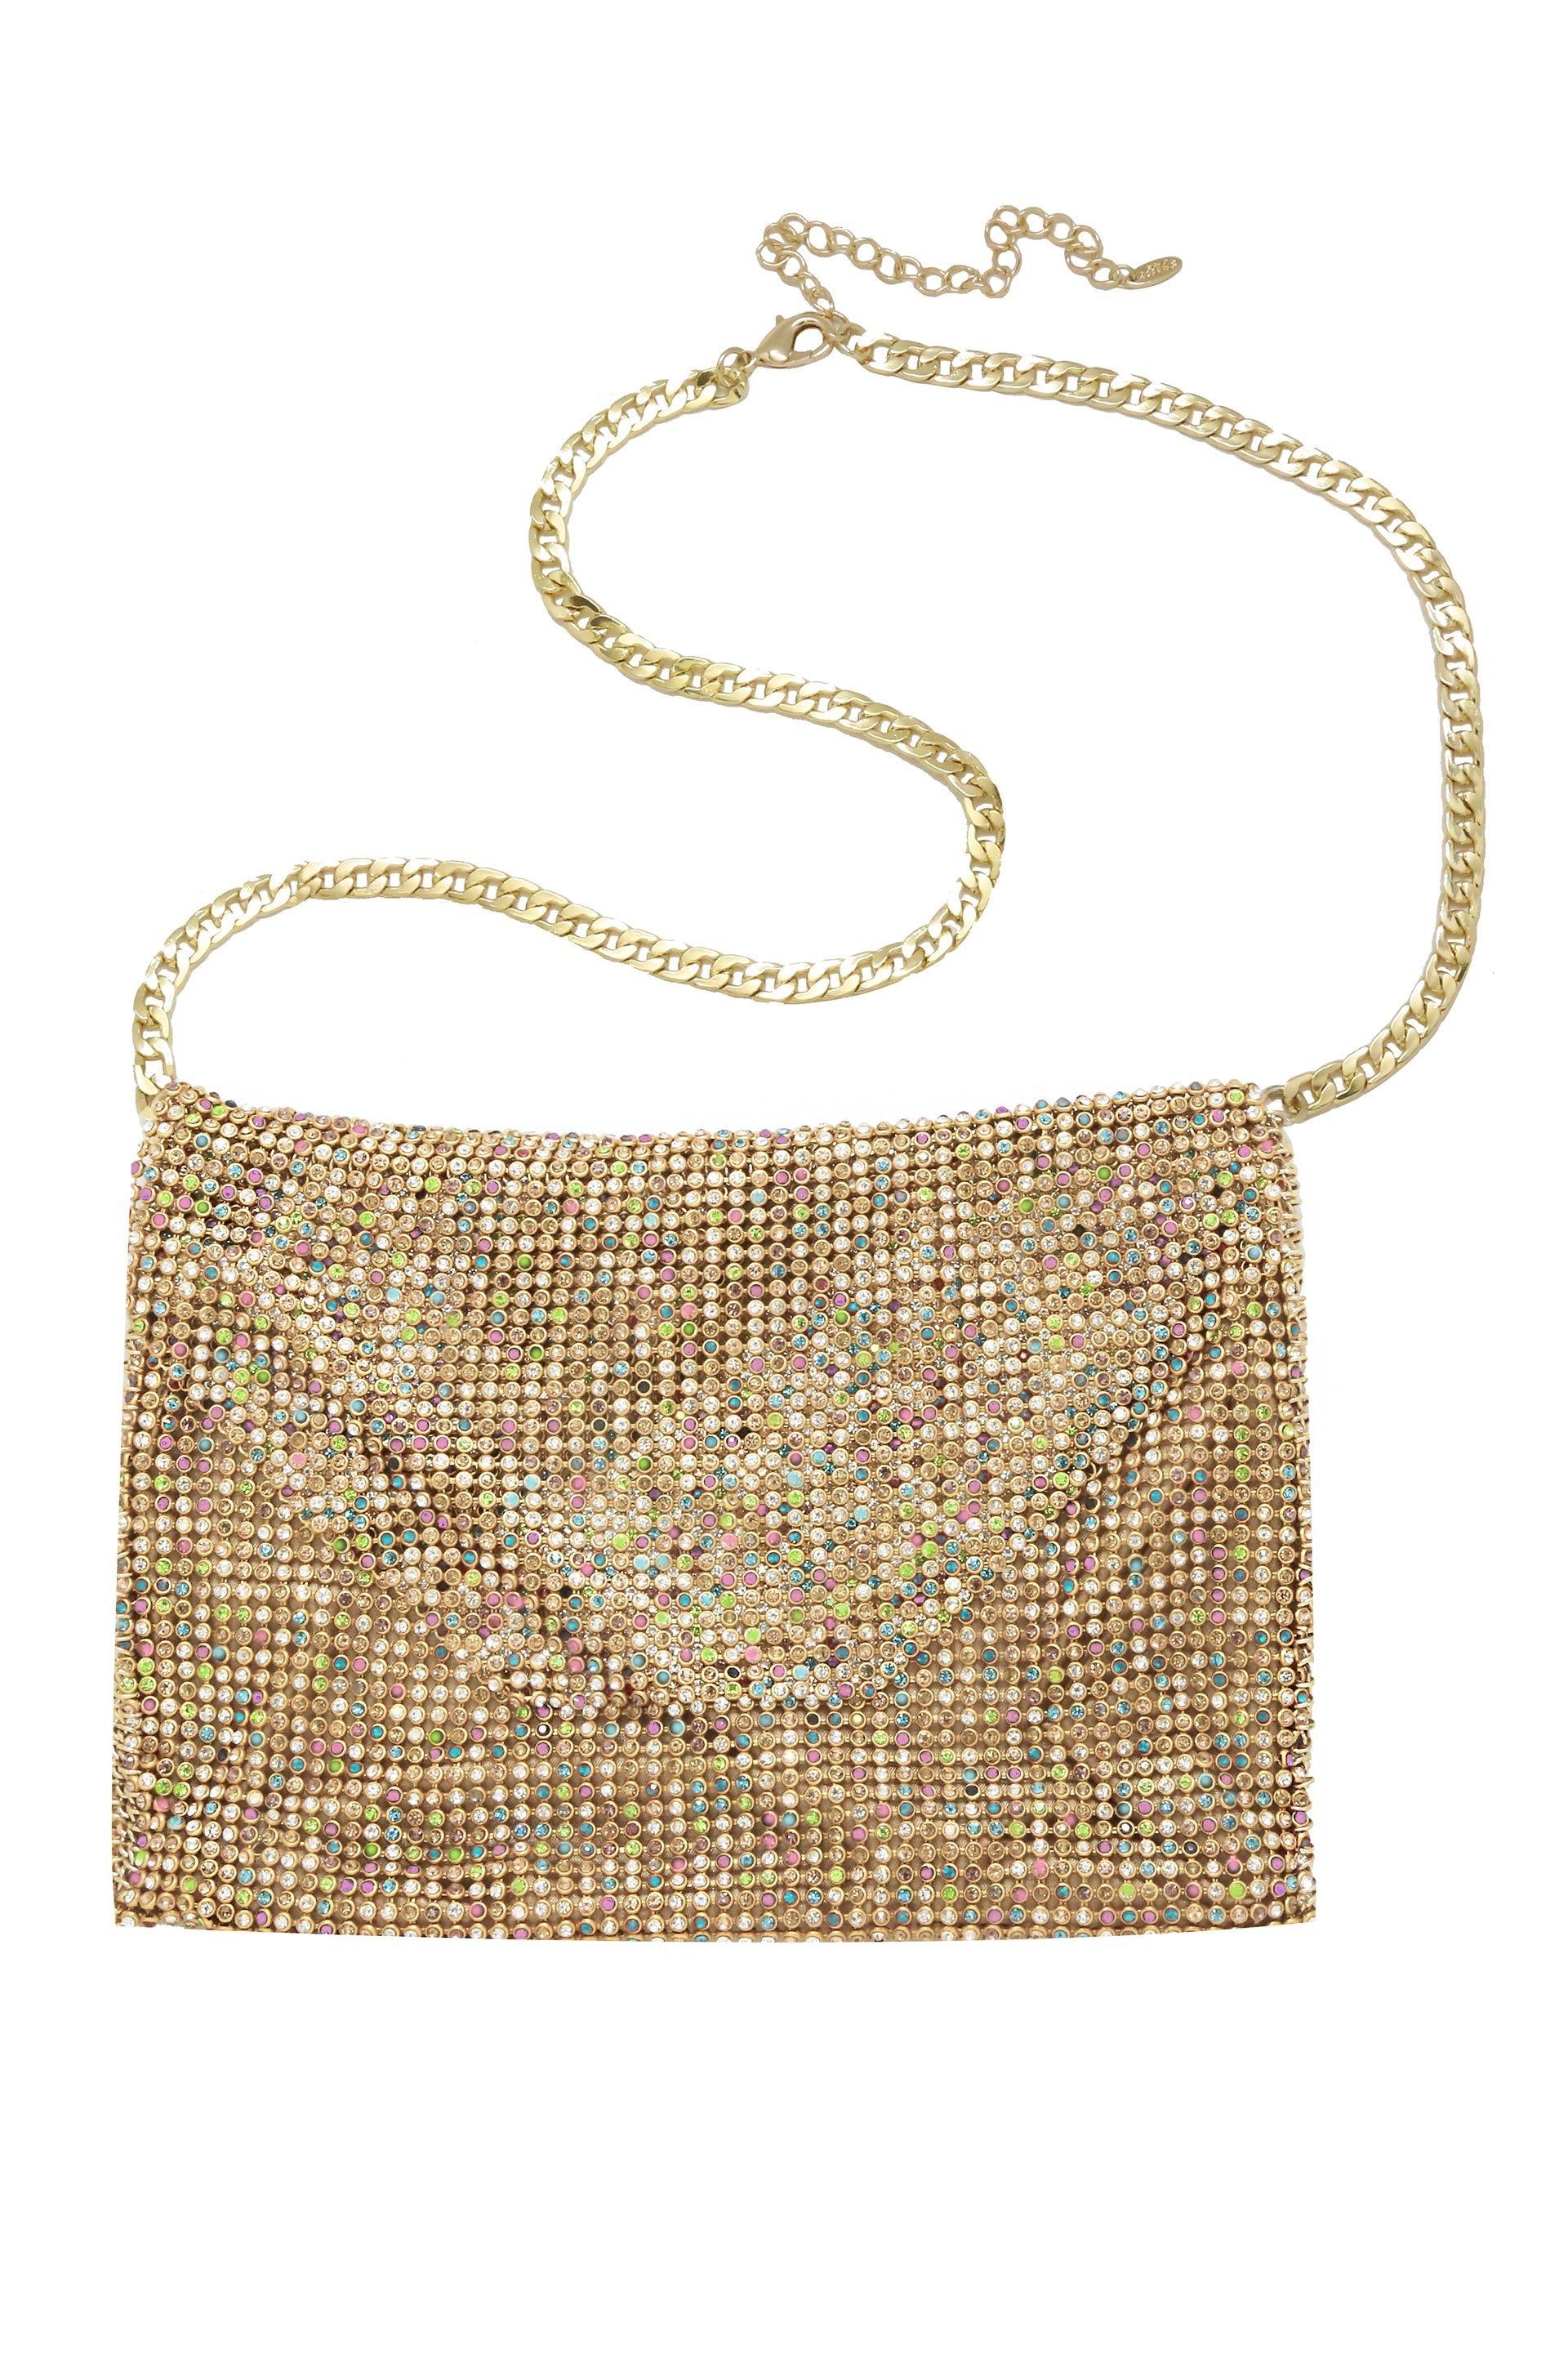 Rainbow Shimmer Night Out Fanny Pack with Gold Chain Strap on white